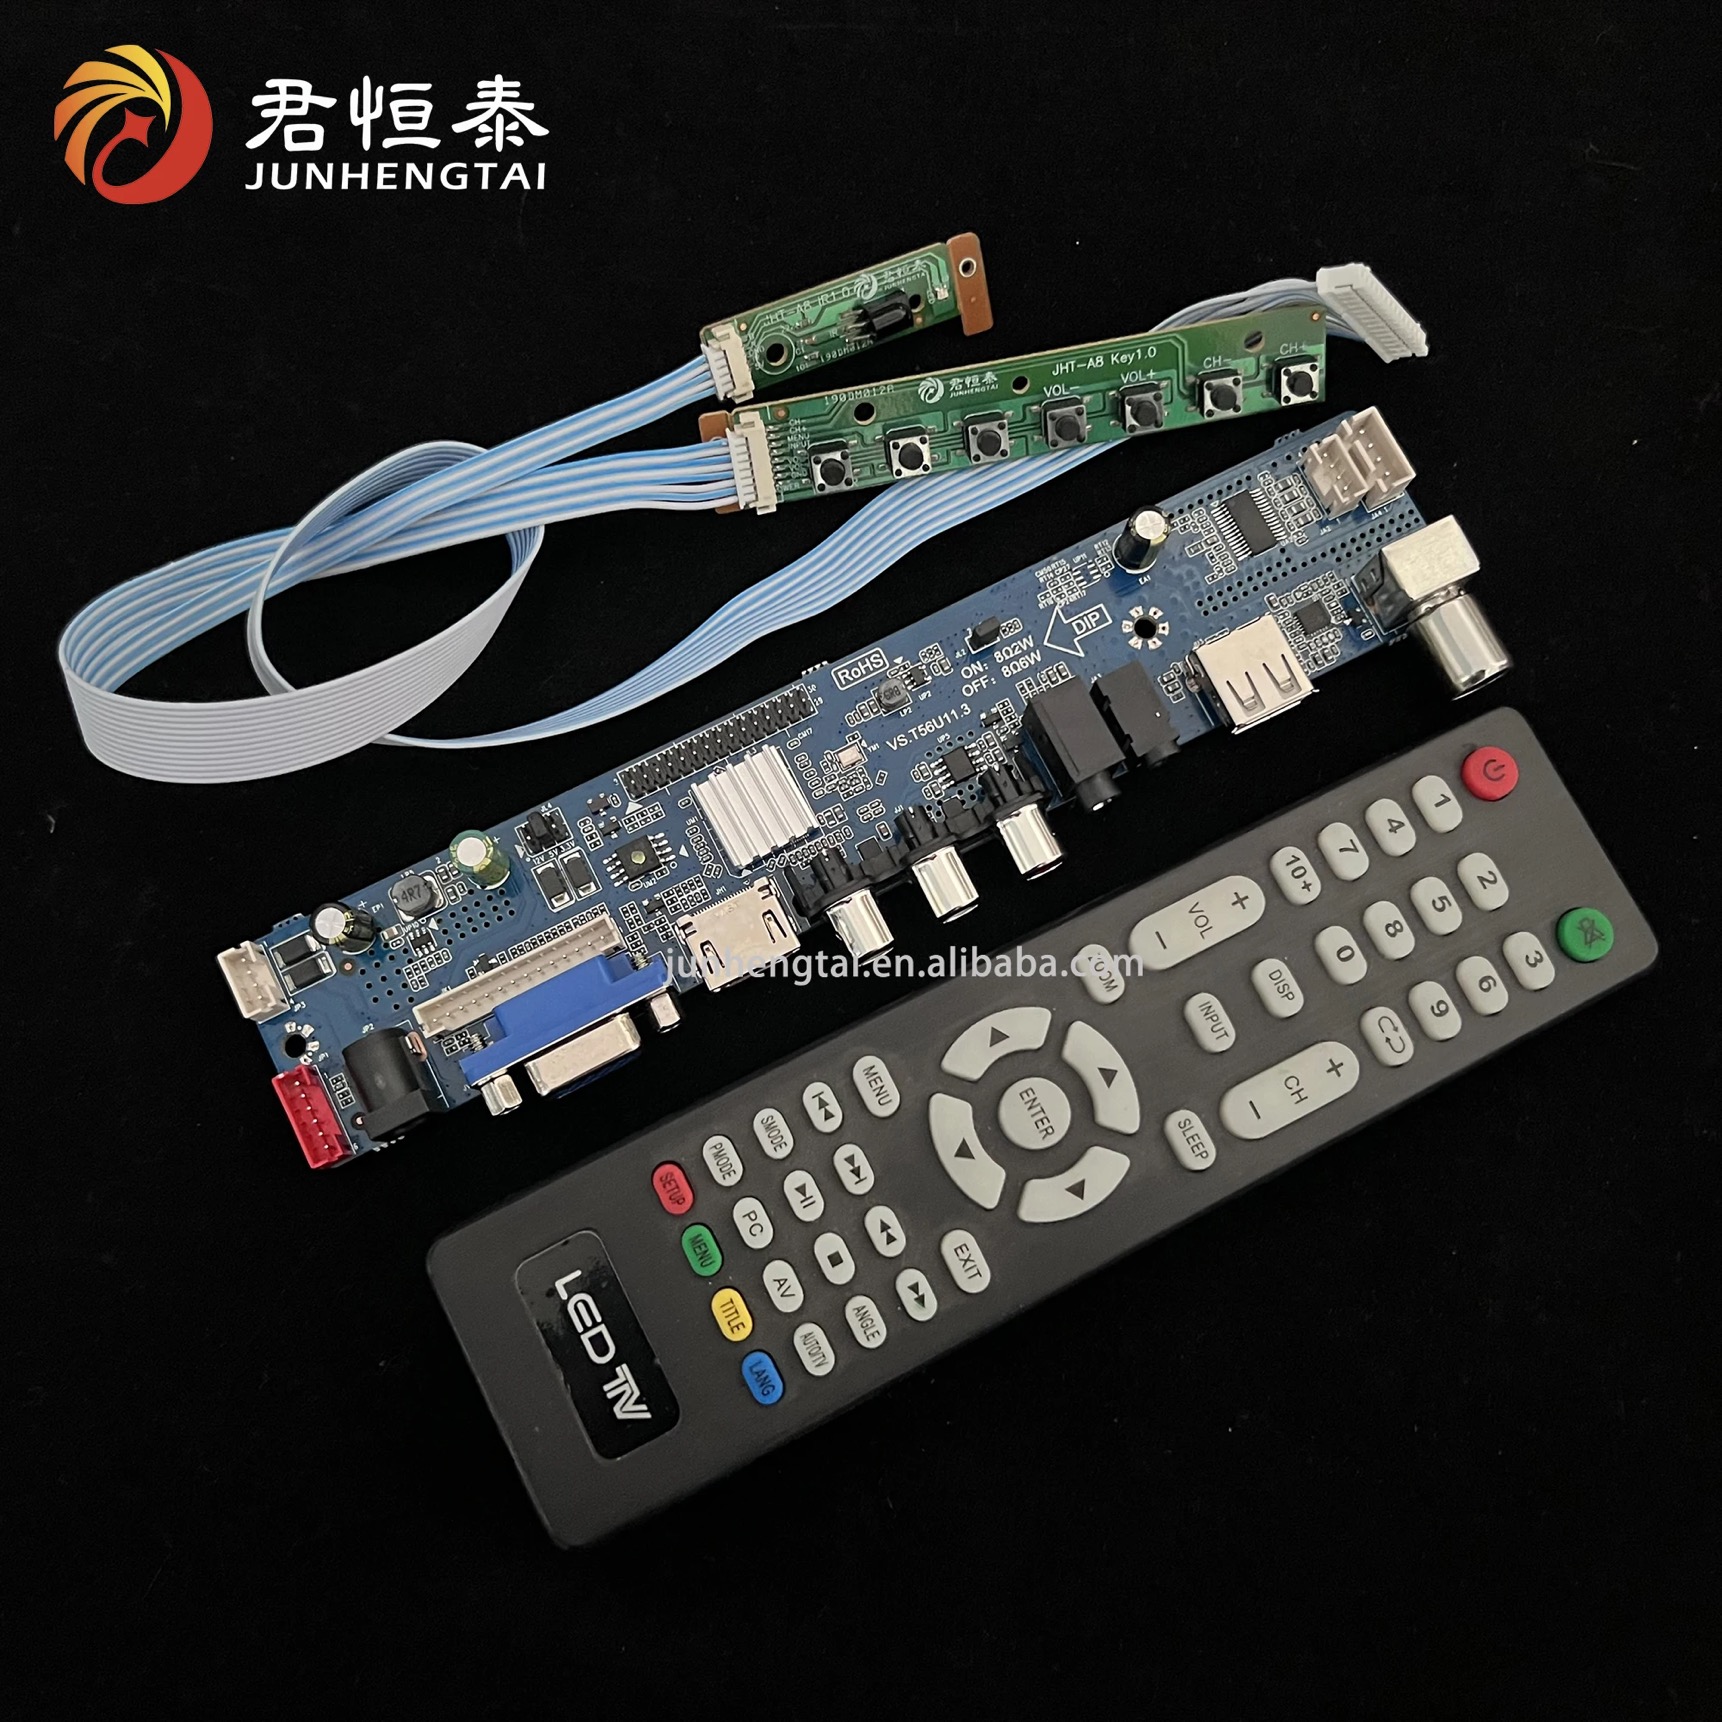 JHT led tv mainboard Universal 24inch drive board v56u11.2 lcd tv pcb control mother board china factory led tv parts supplier 